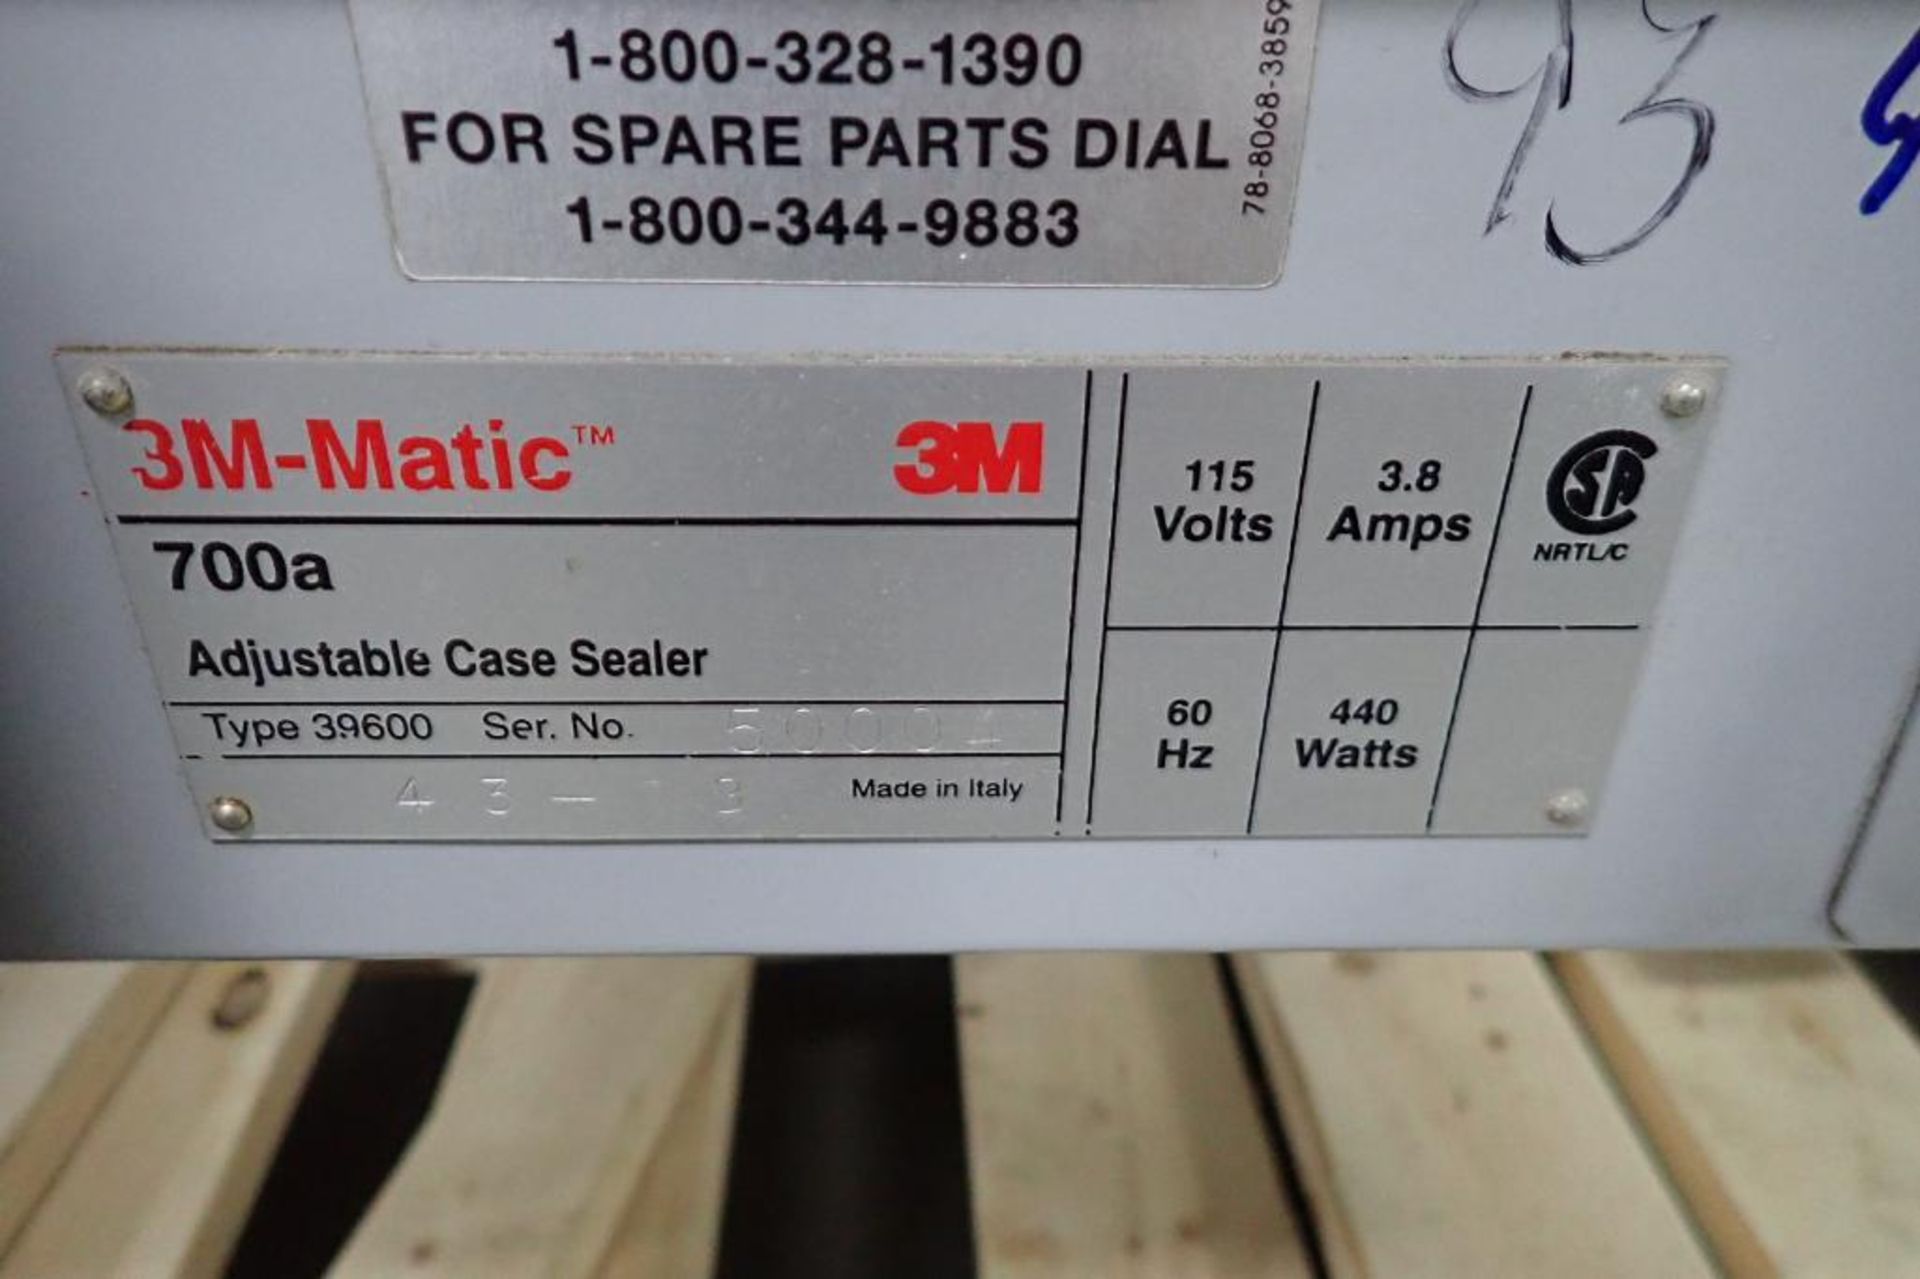 3M Matic adjustable case sealer, Model 700a, SN 50004, top taper and bottom taper, on casters (CAG i - Image 9 of 9